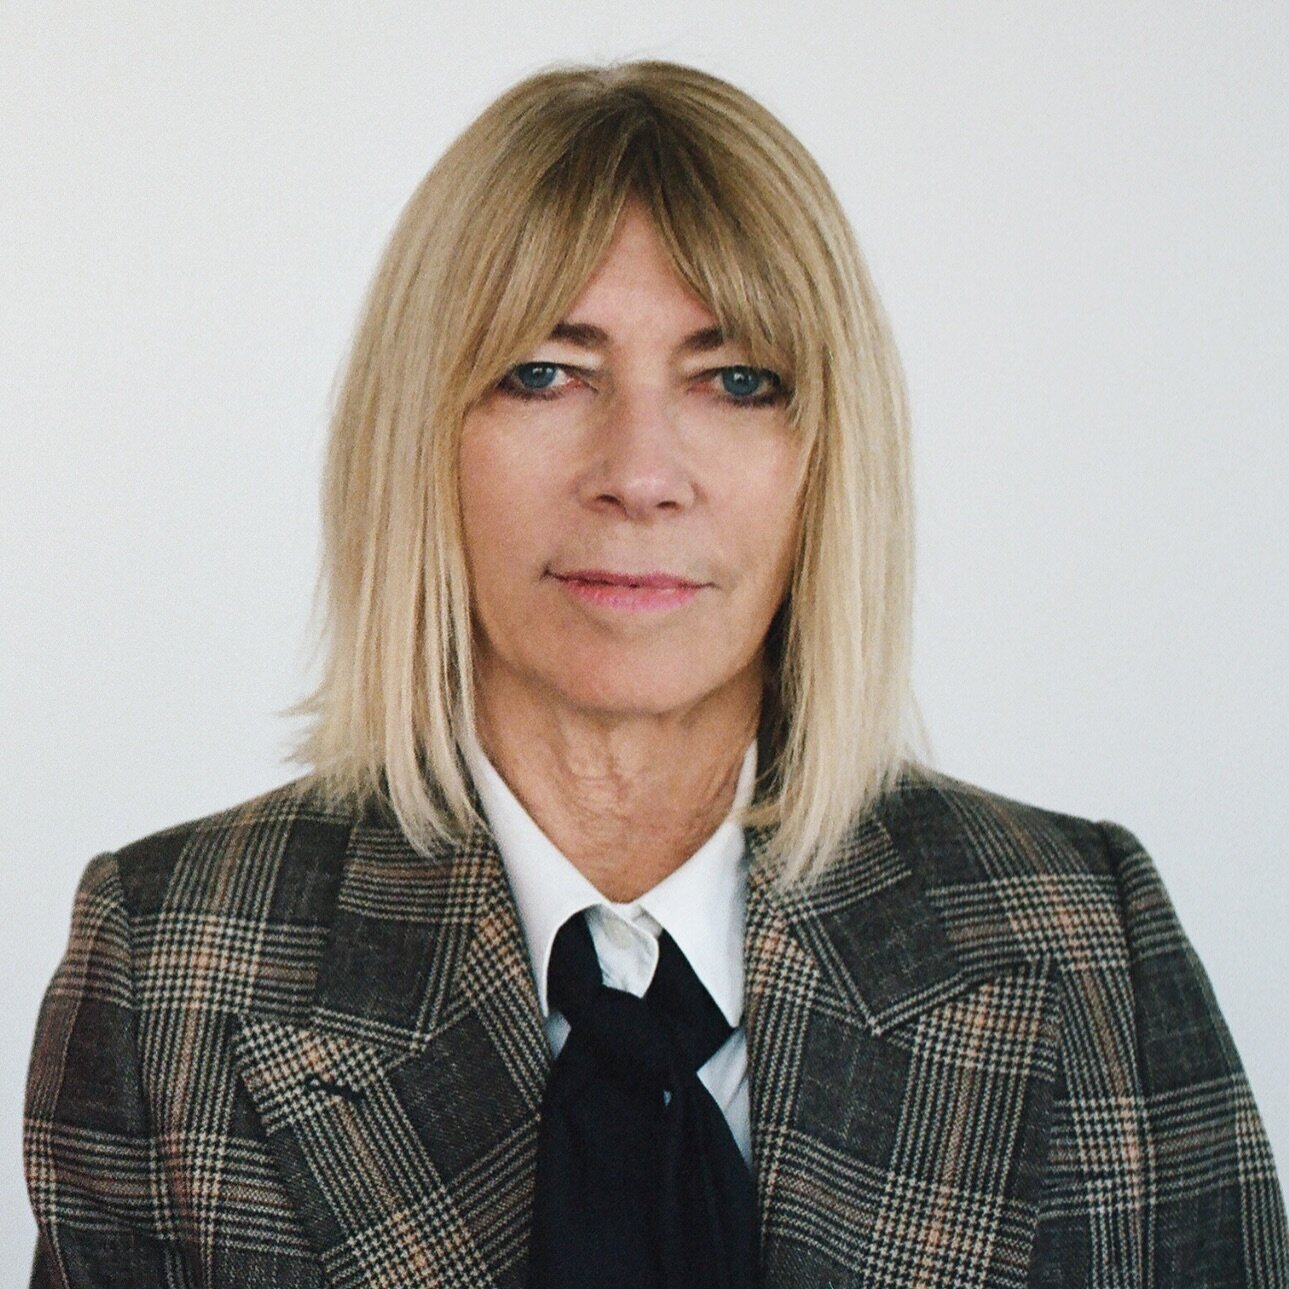 &ldquo;What matters? What counts? What&rsquo;s urgent? It&rsquo;s about being sensitive to the winds in that respect. Right now, I&rsquo;m just kind of thinking about these ideas, about import/export.&rdquo; Hit the sound button to hear Kim Gordon&rs